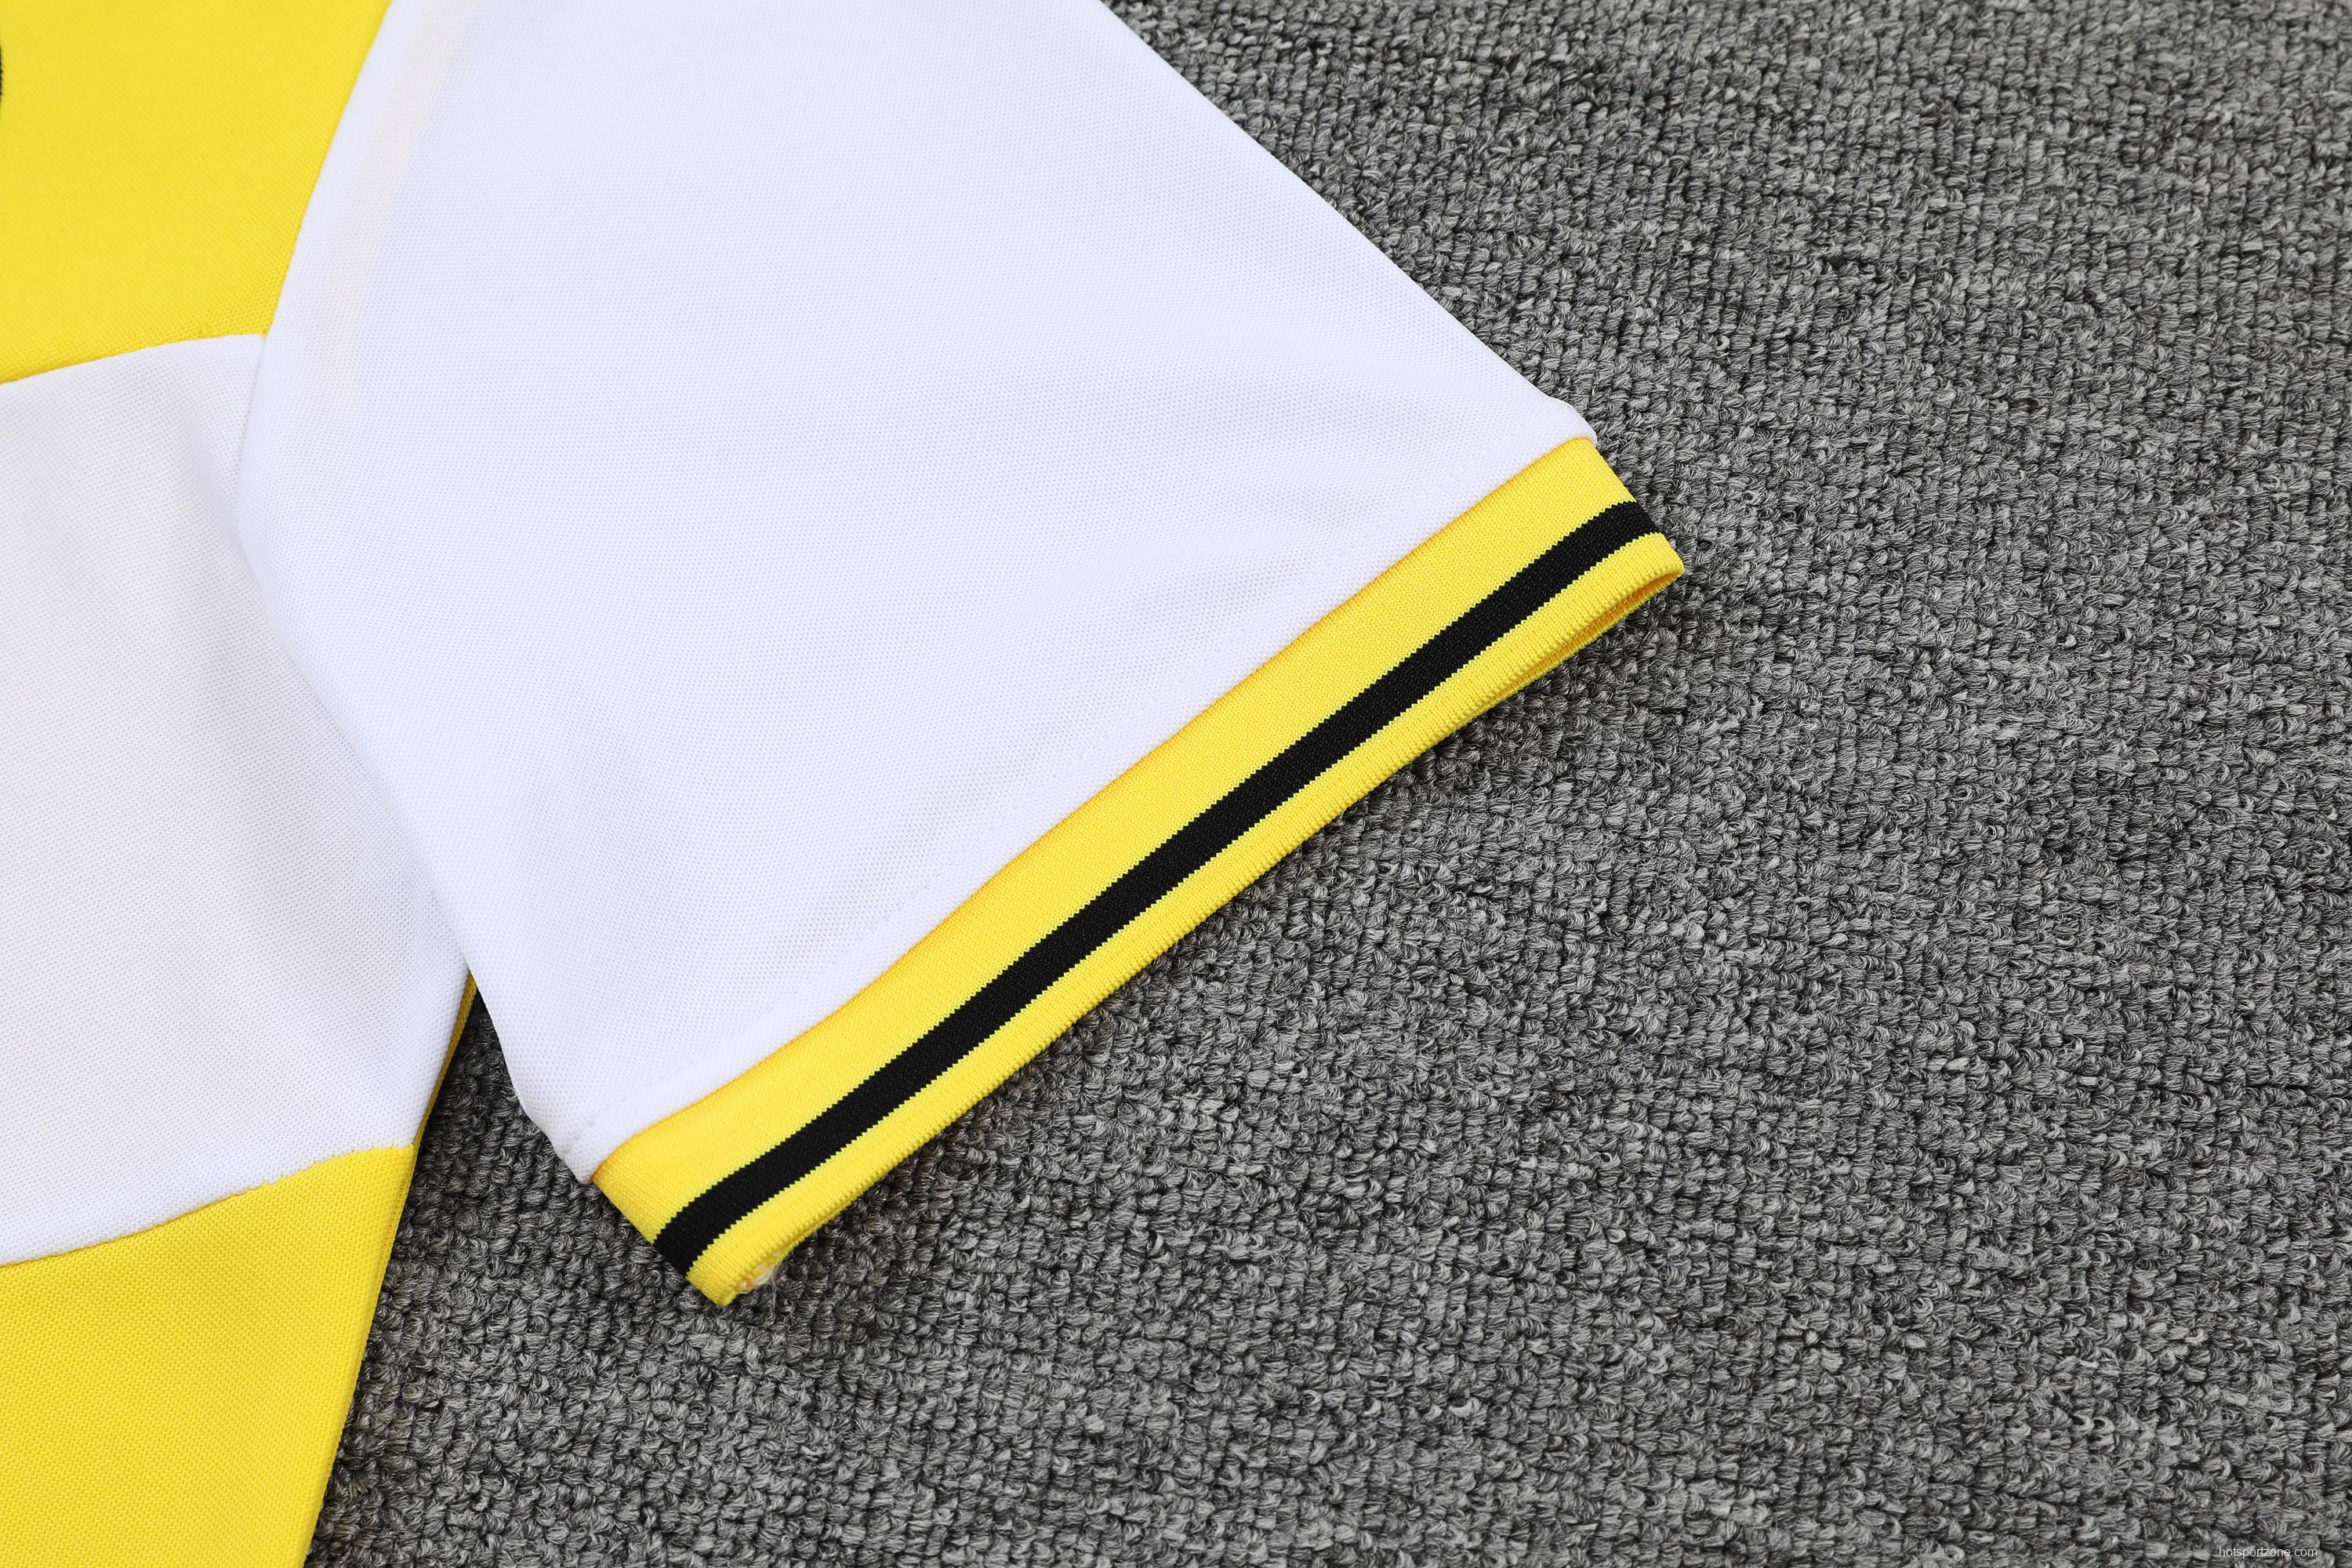 Borussia Dortmund POLO kit yellow and white (not supported to be sold separately)